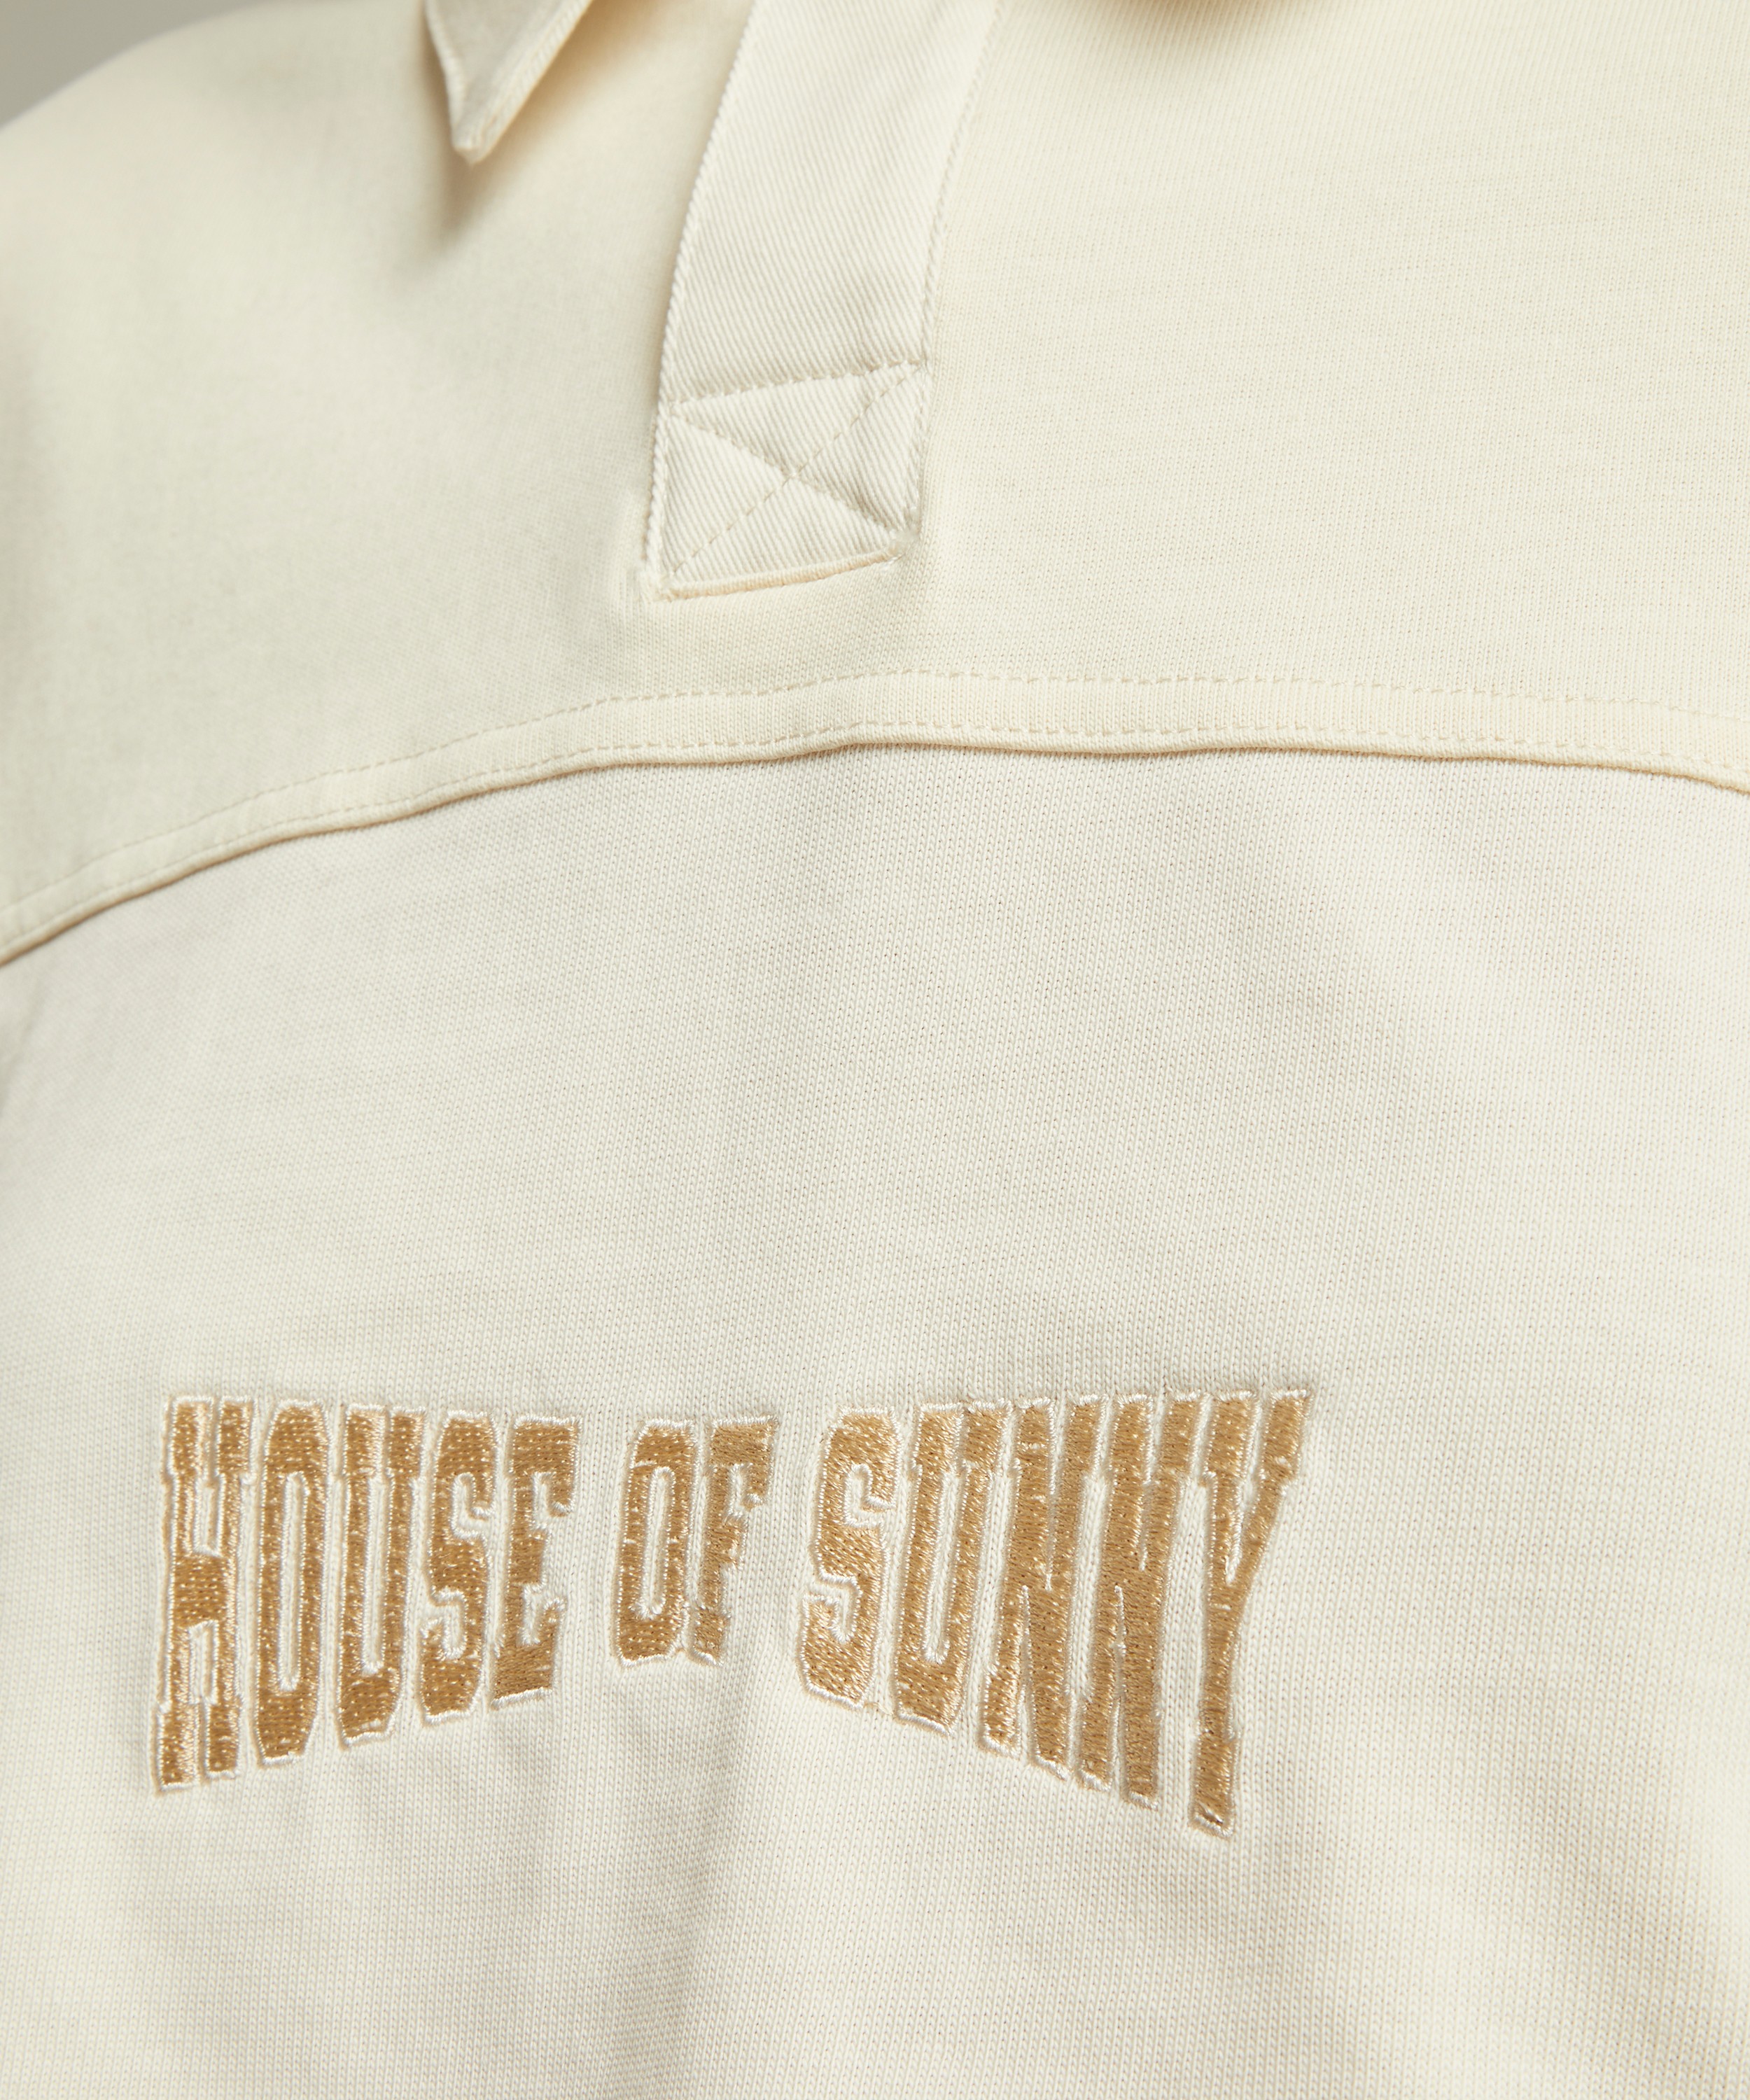 House of Sunny - Cropped Power Logo Button Up Shirt image number 4